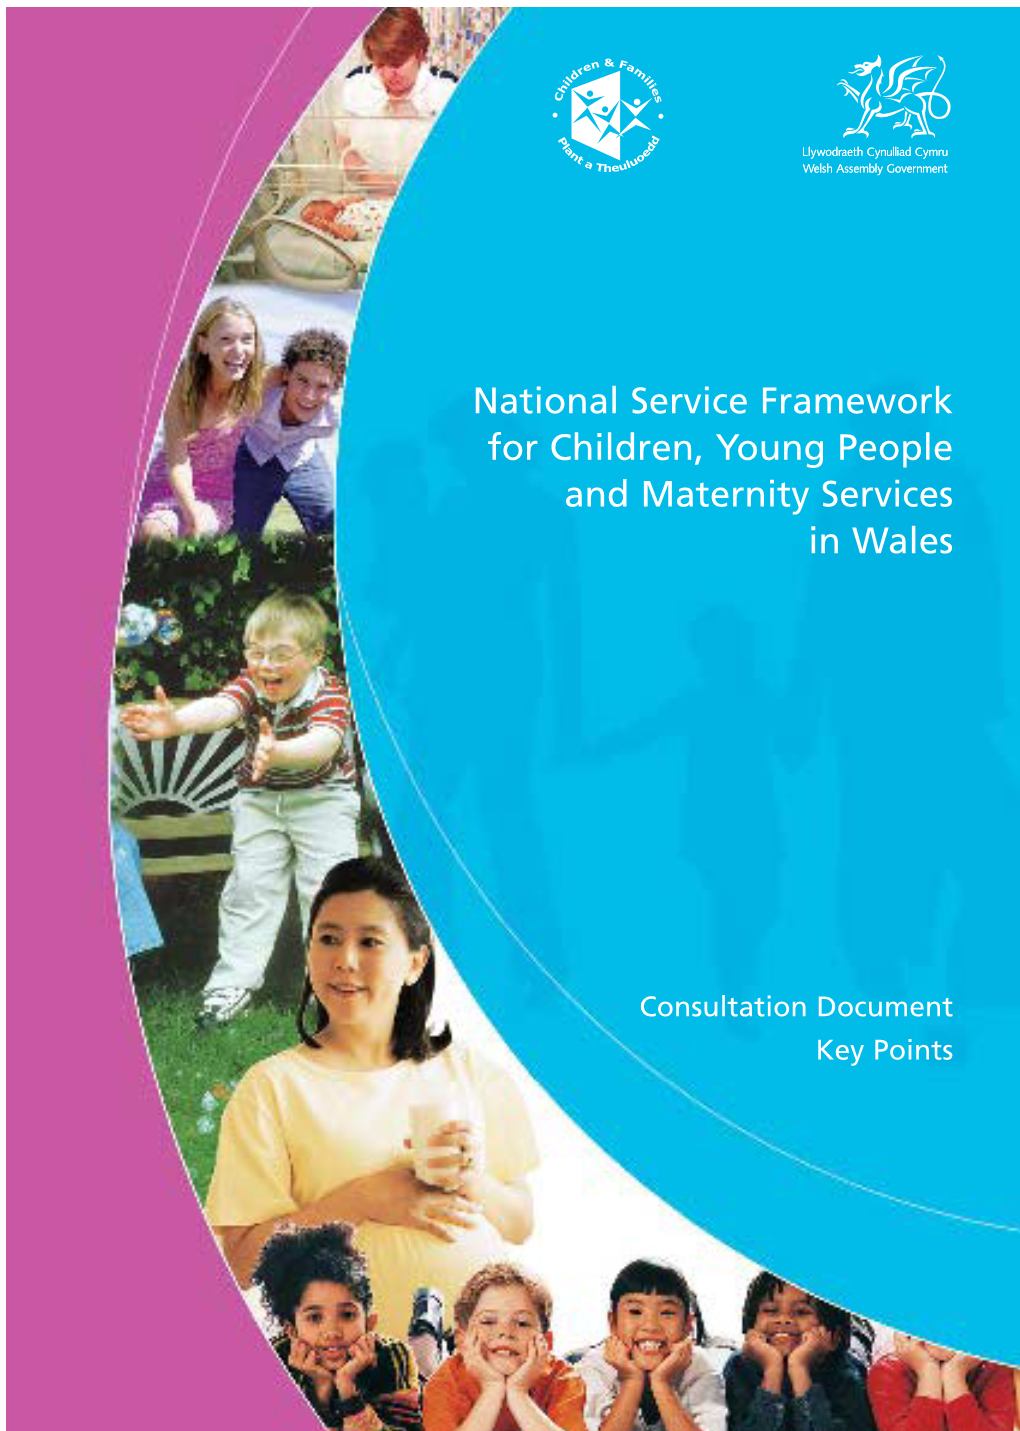 National Service Framework for Children, Young People and Maternity Services in Wales